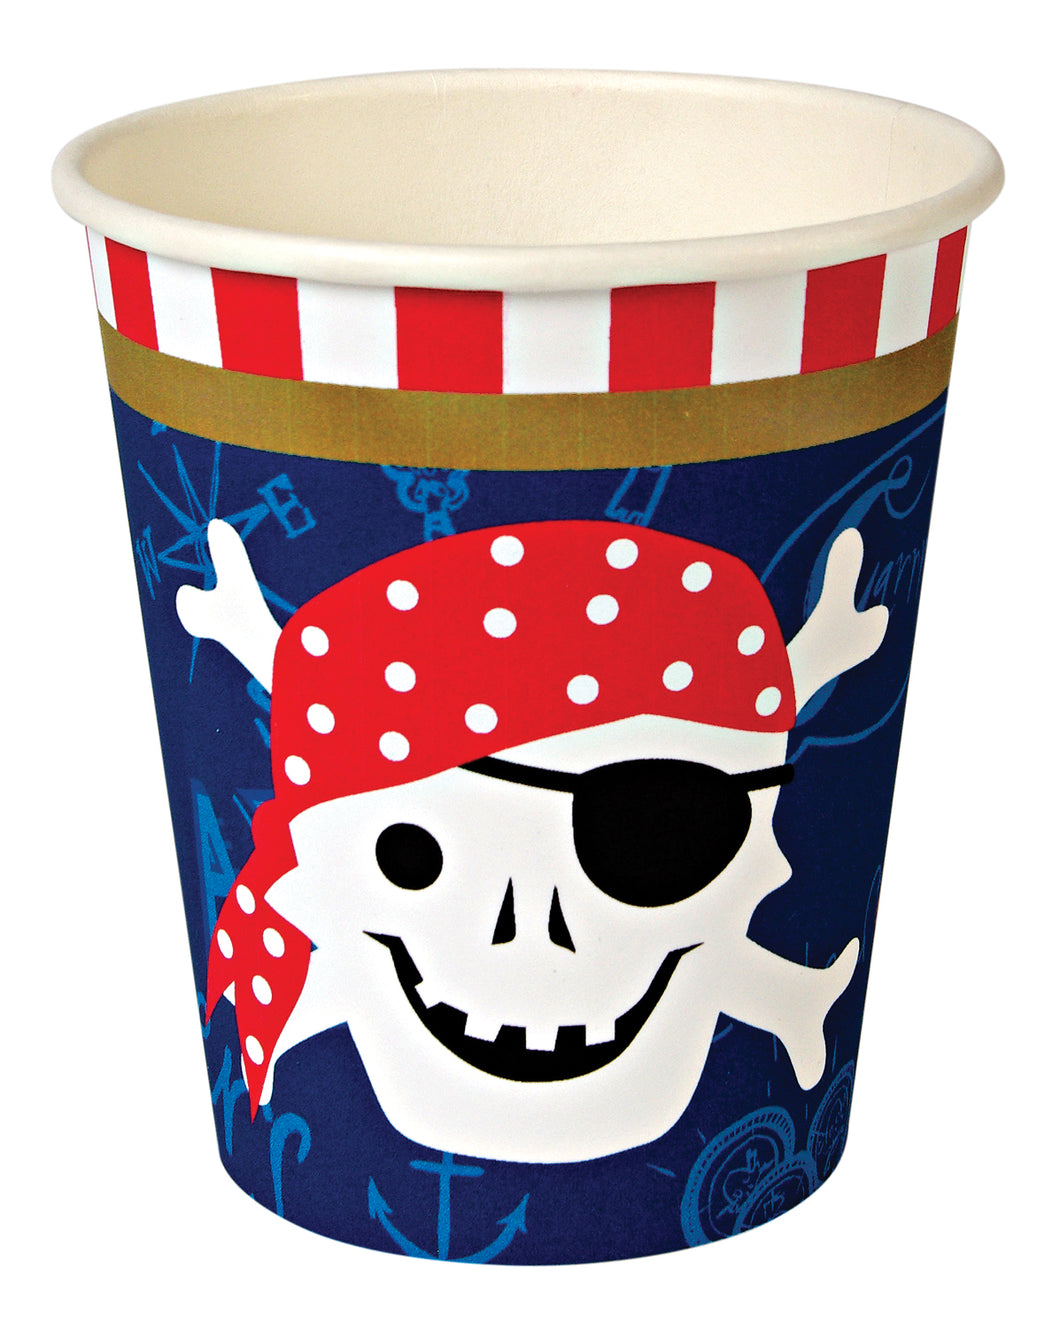 Ahoy There Pirate, 12 hot or cold party cups by meri meri